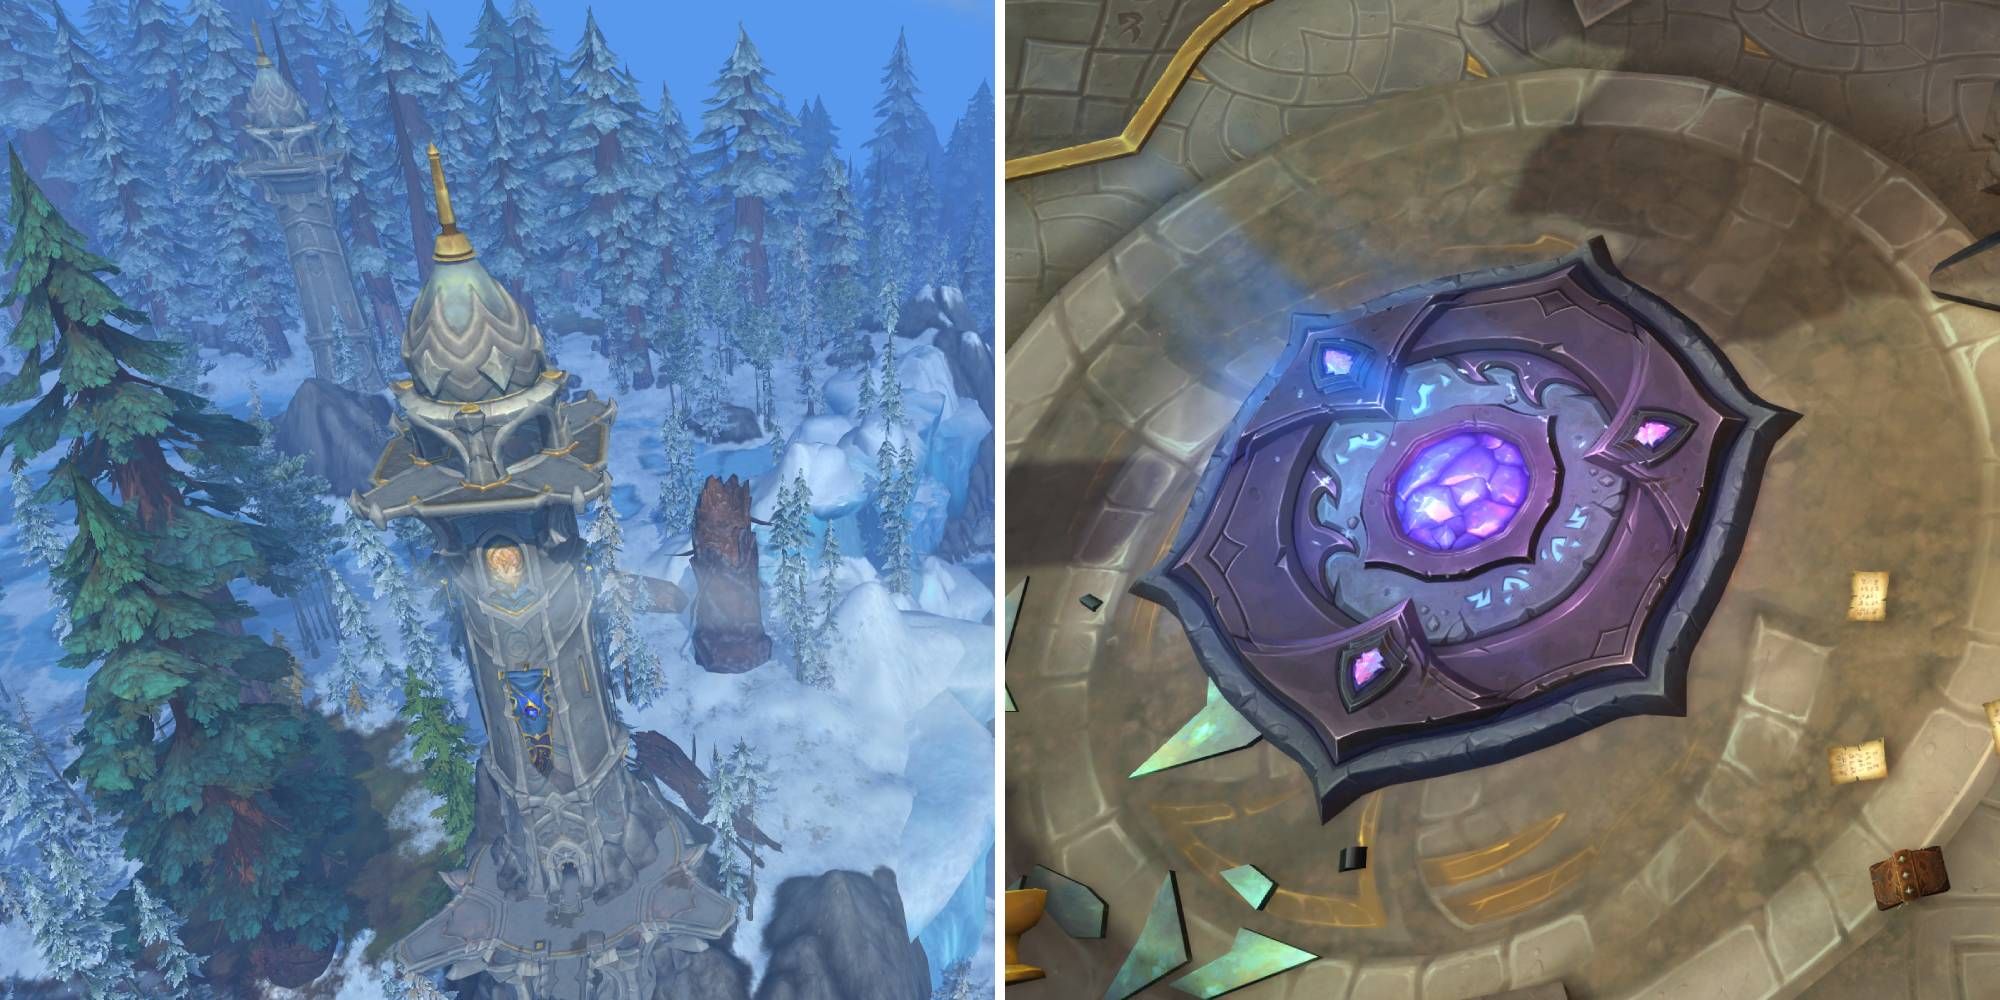 Split image showing a WoW Dragonflight Waygate and a tower you'll find one in